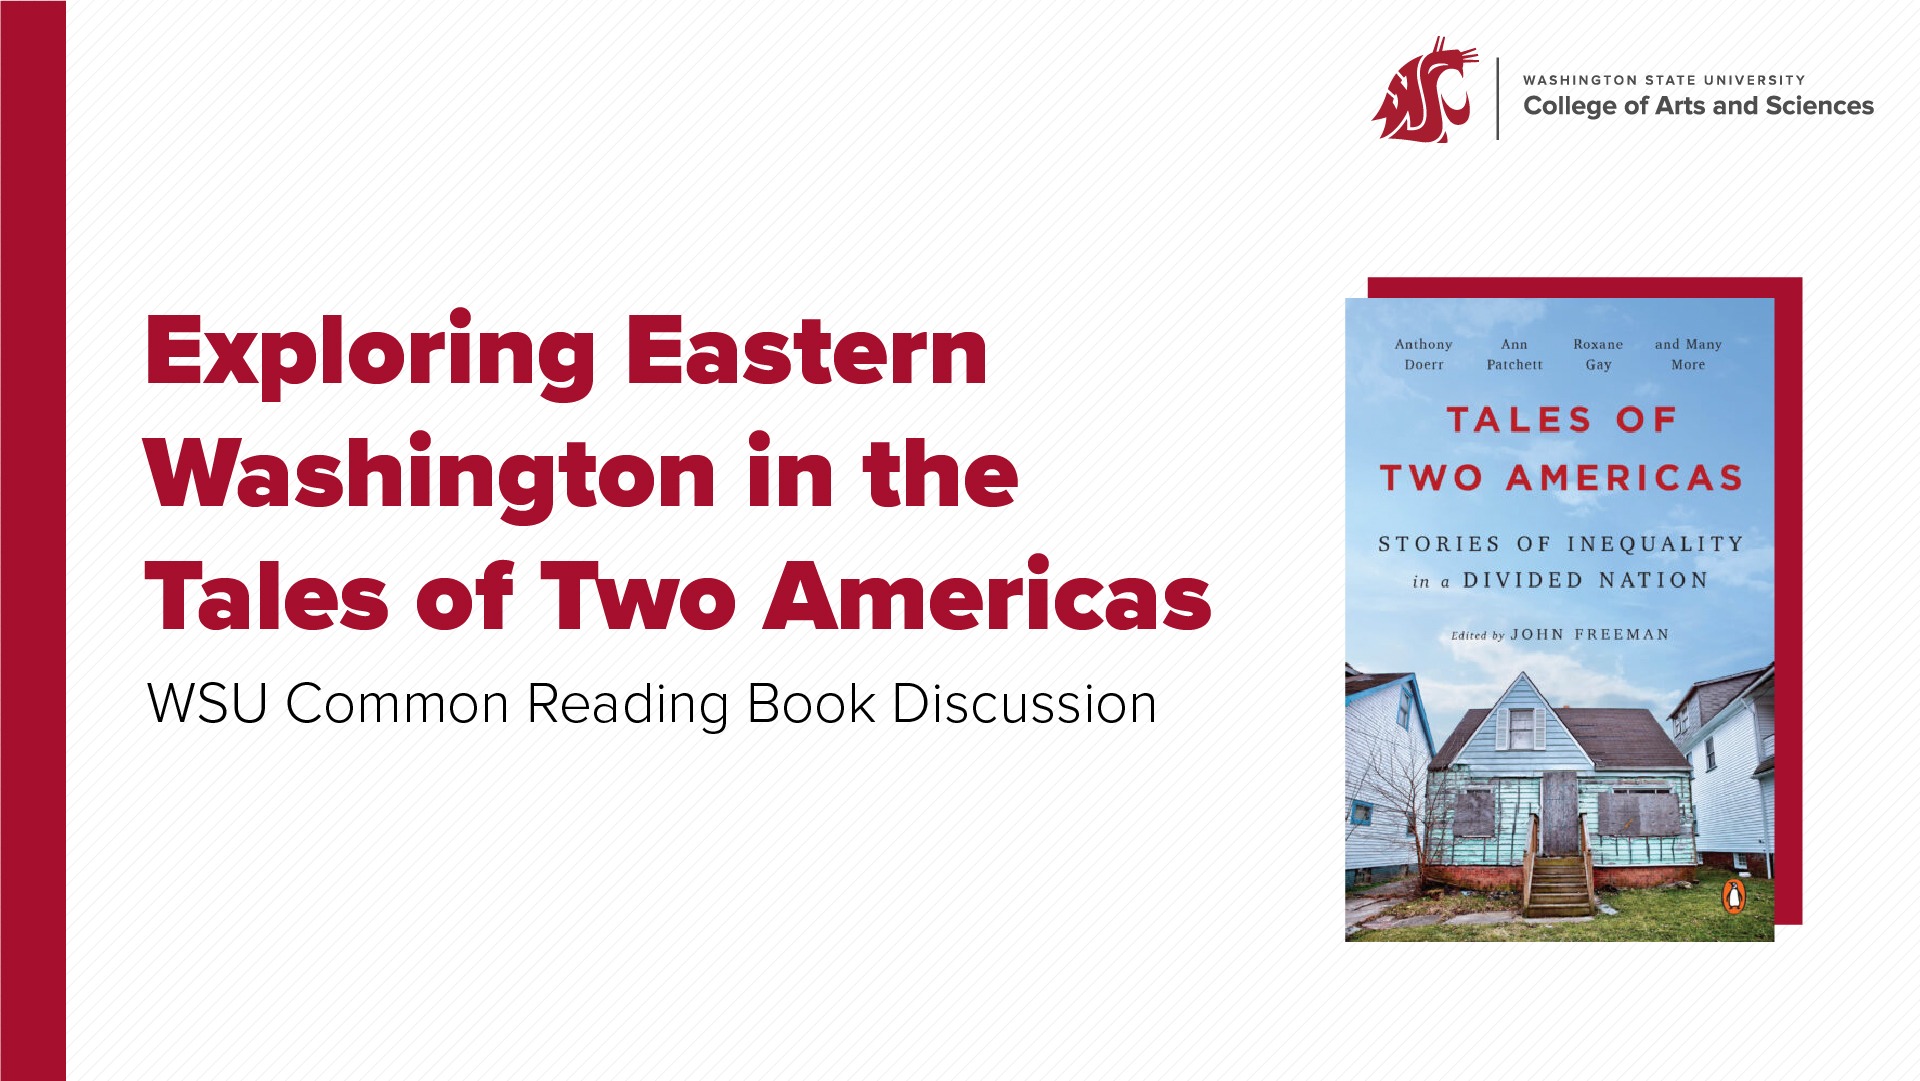 Exploring Eastern Washington in the Tales of Two Americas